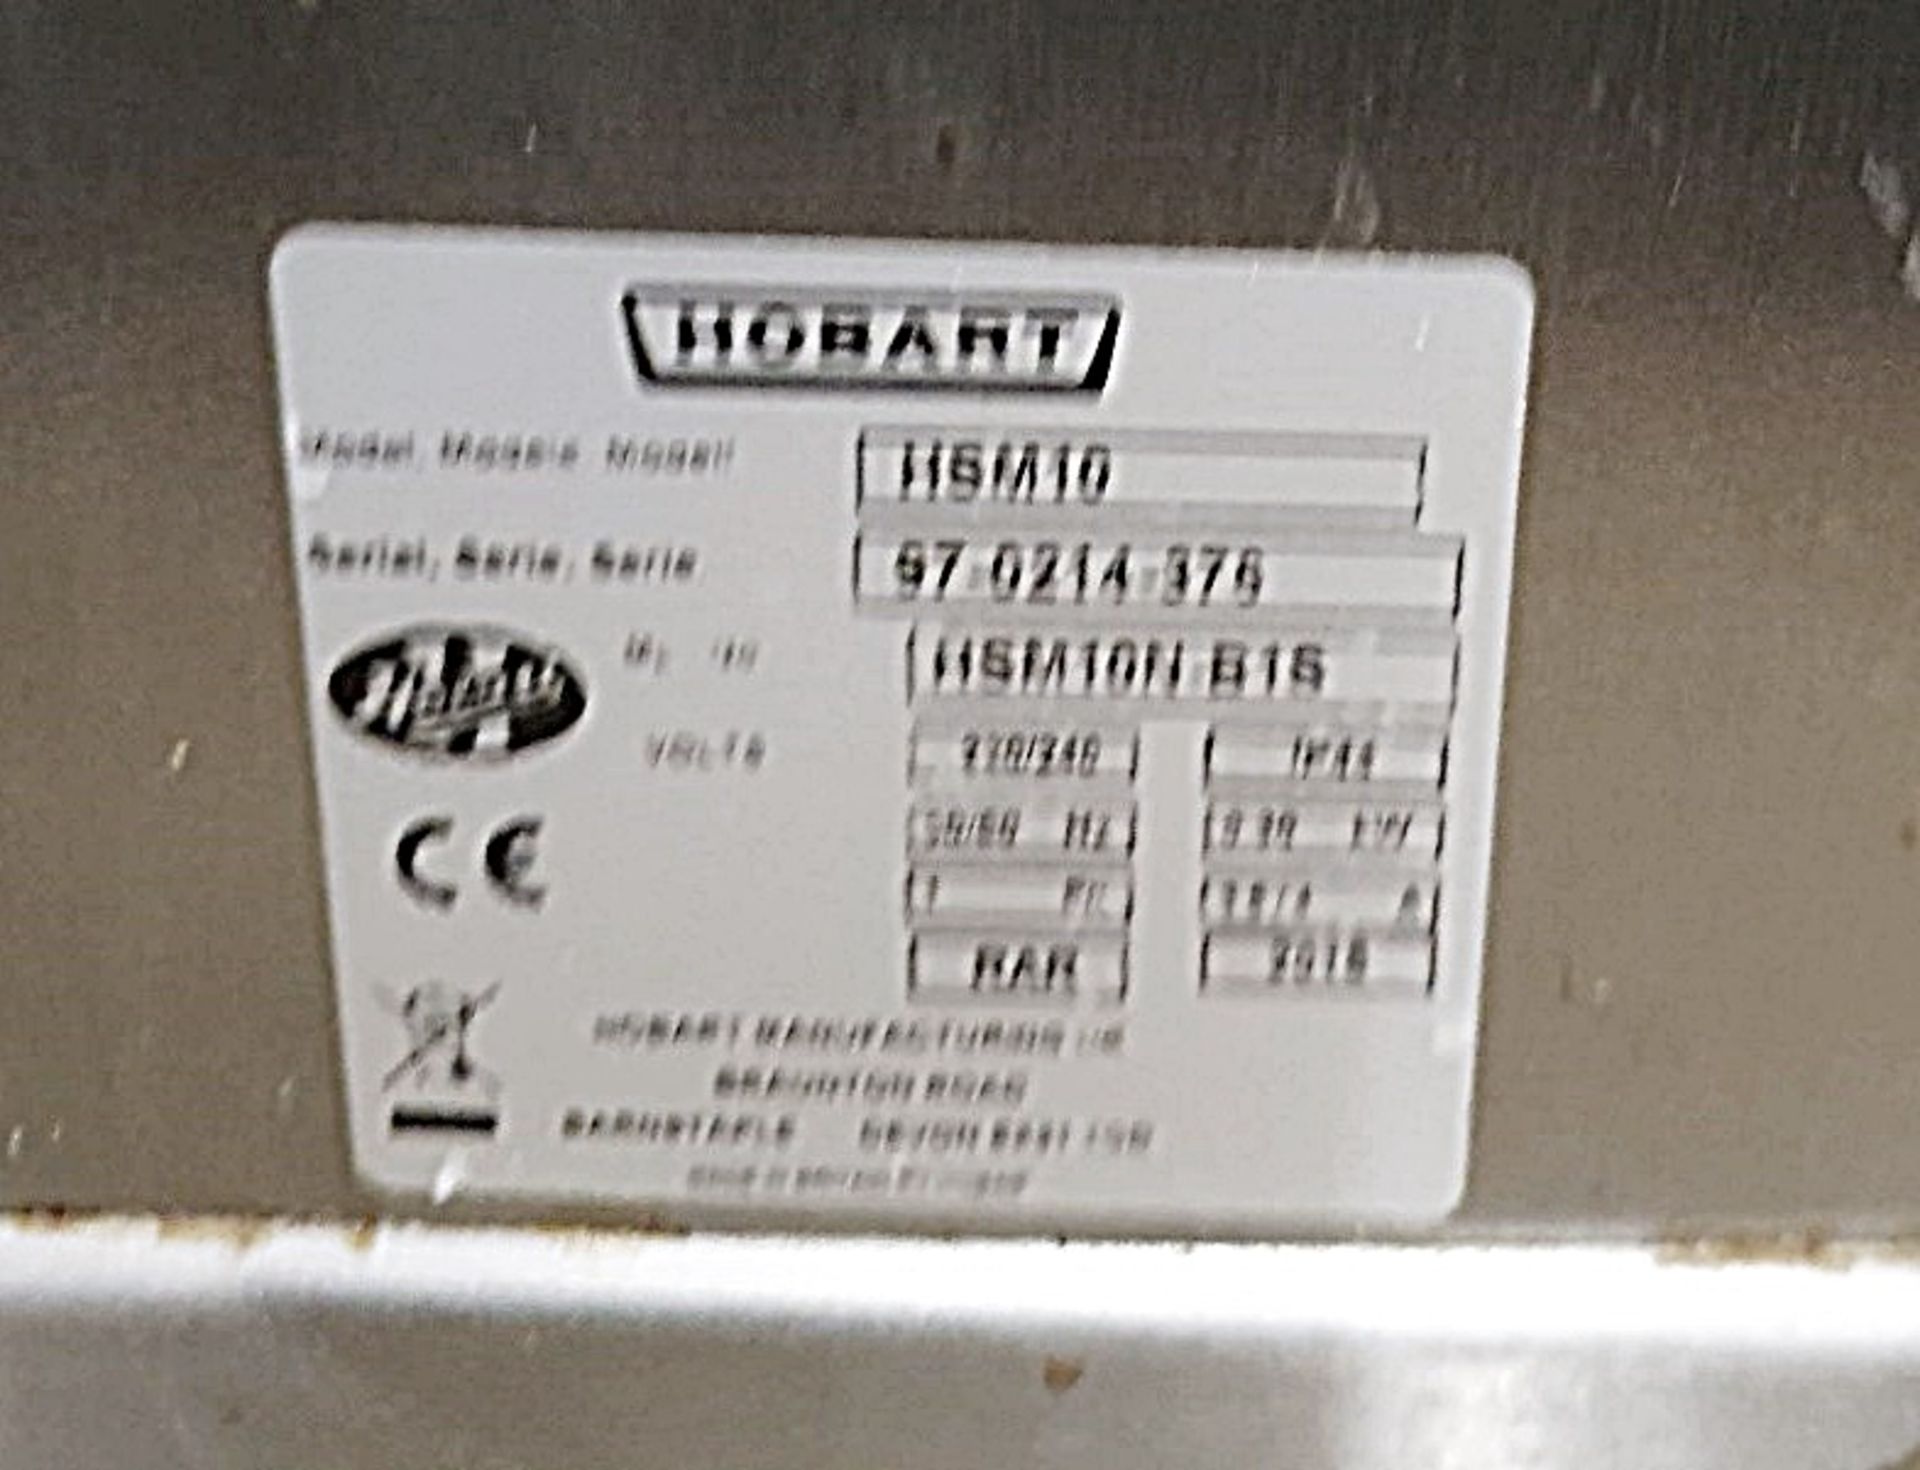 1 x Hobart HSM10-B1S 10 Litre Bench Planetary Mixer - H57.5 x W36.5 x D41.5 cms - Ref PA218 - - Image 4 of 4